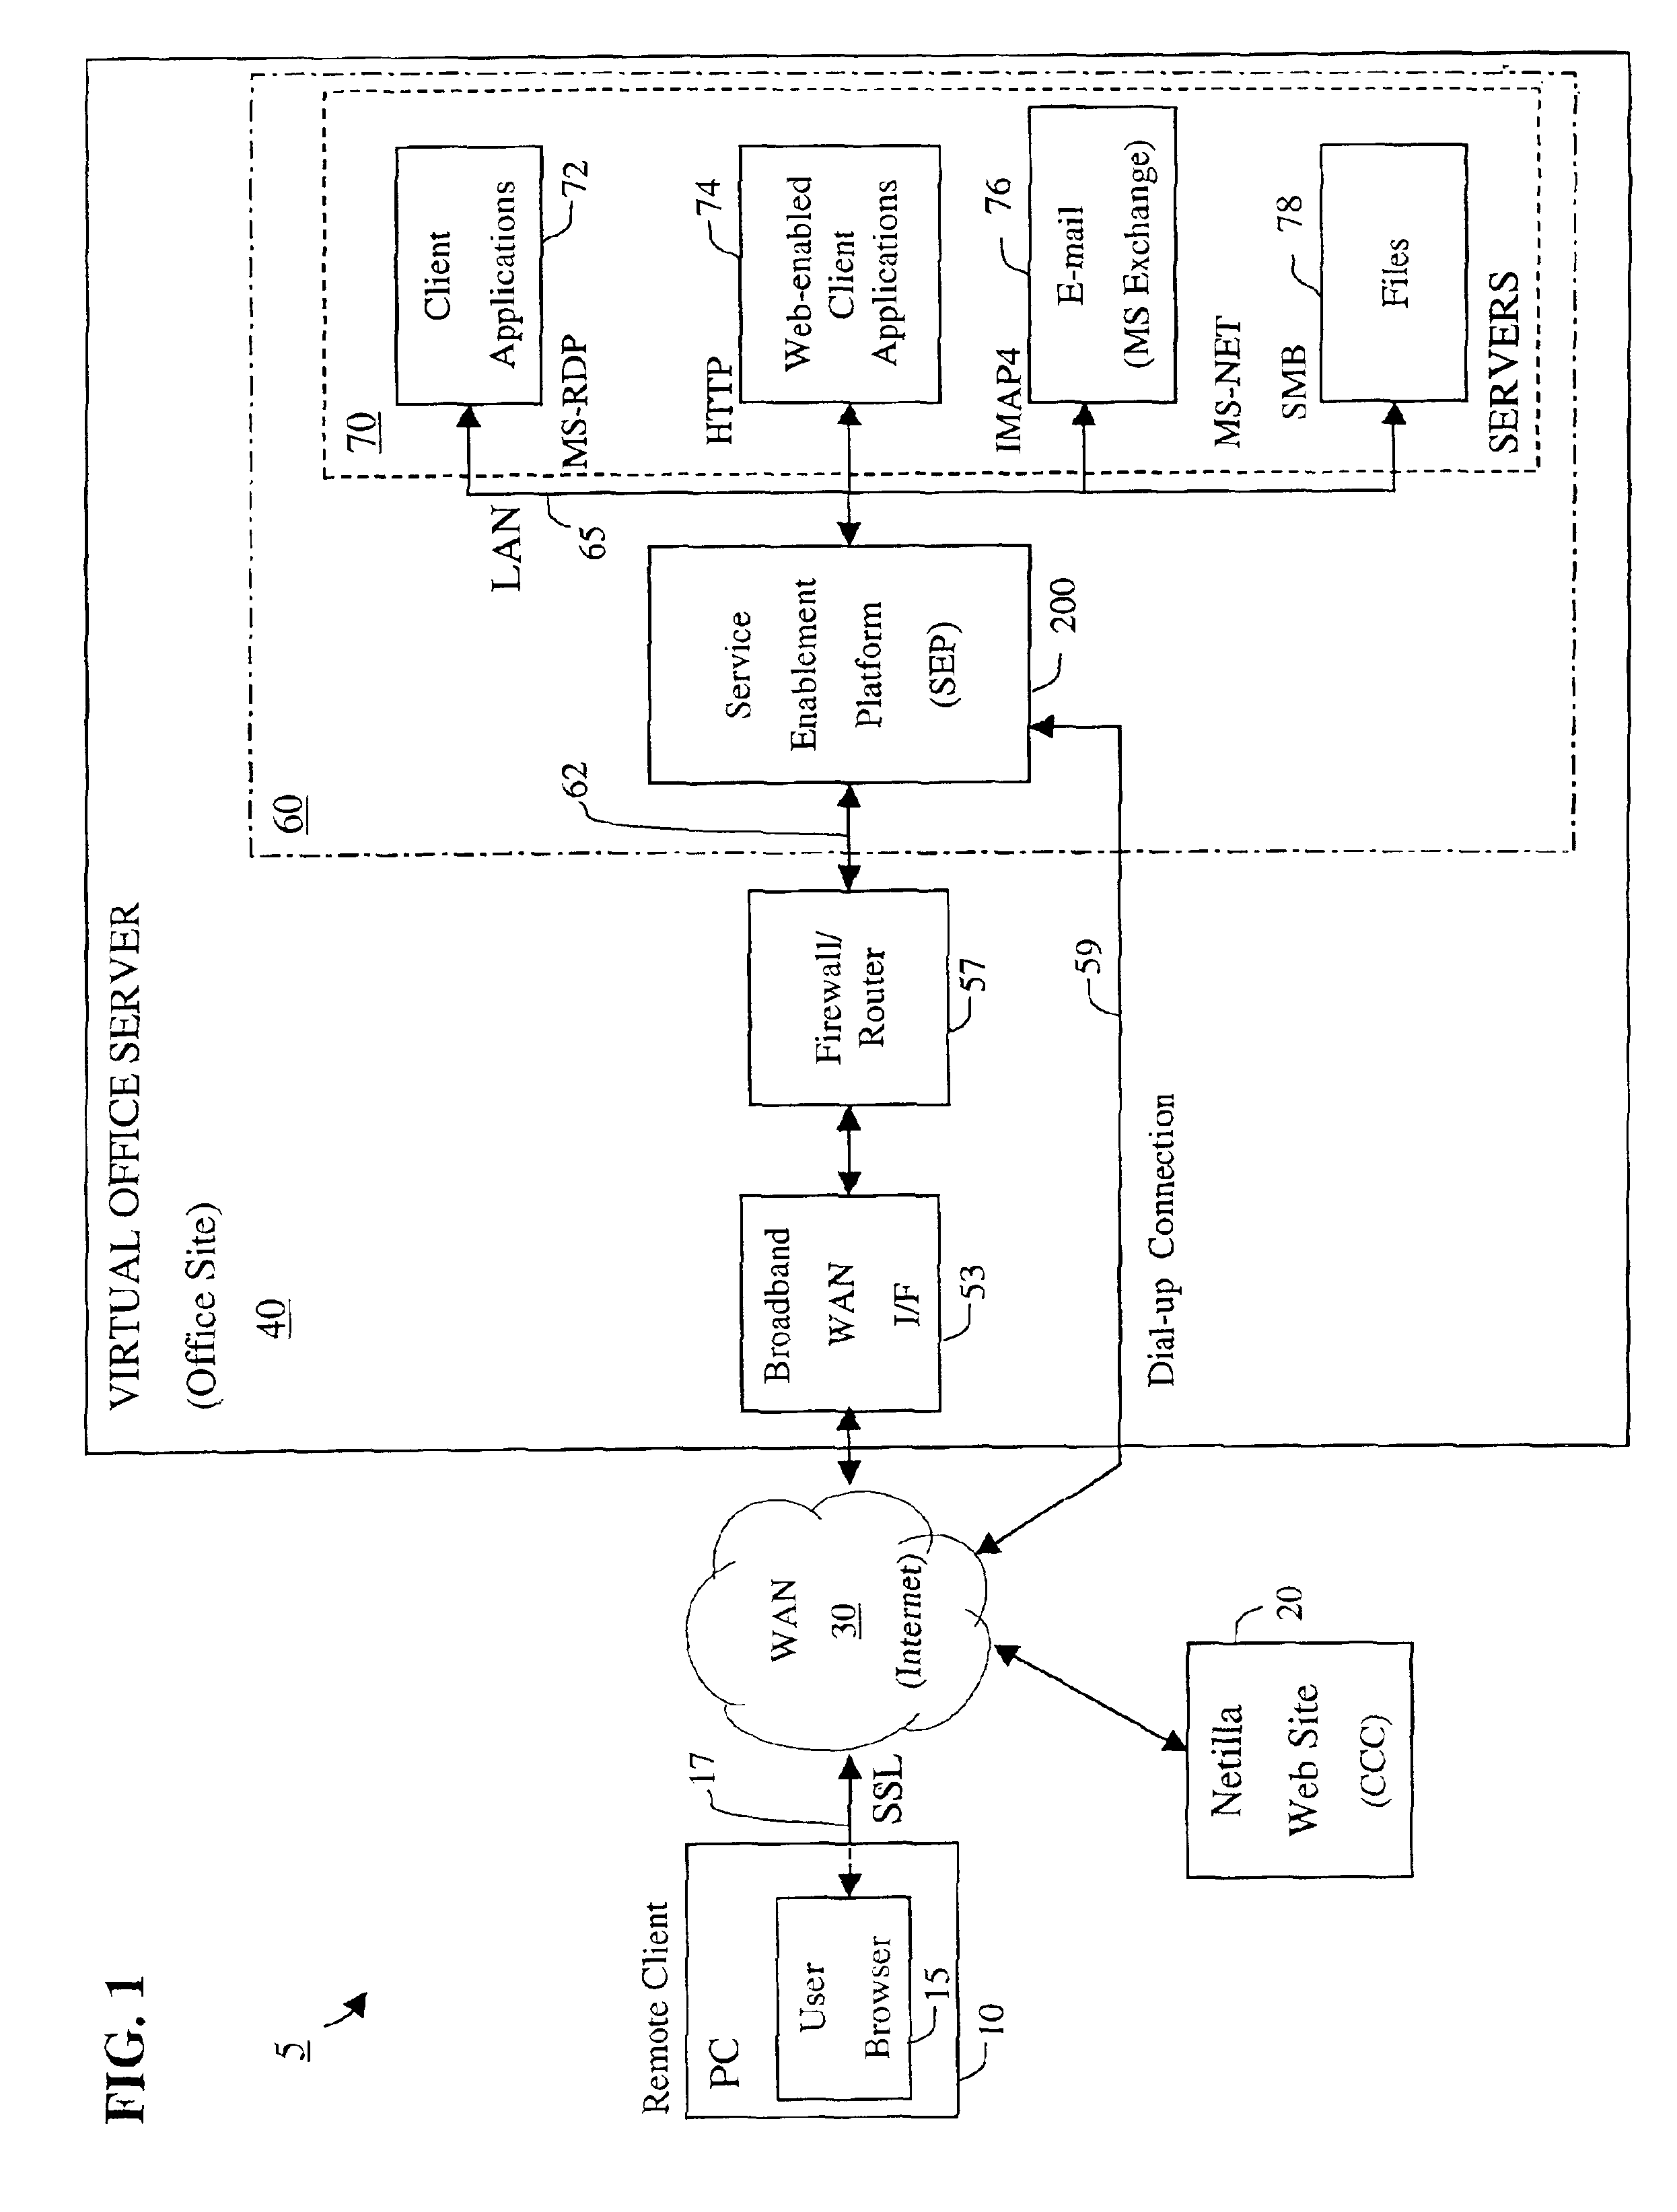 Apparatus and accompanying methods for providing, through a centralized server site, an integrated virtual office environment, remotely accessible via a network-connected web browser, with remote network monitoring and management capabilities